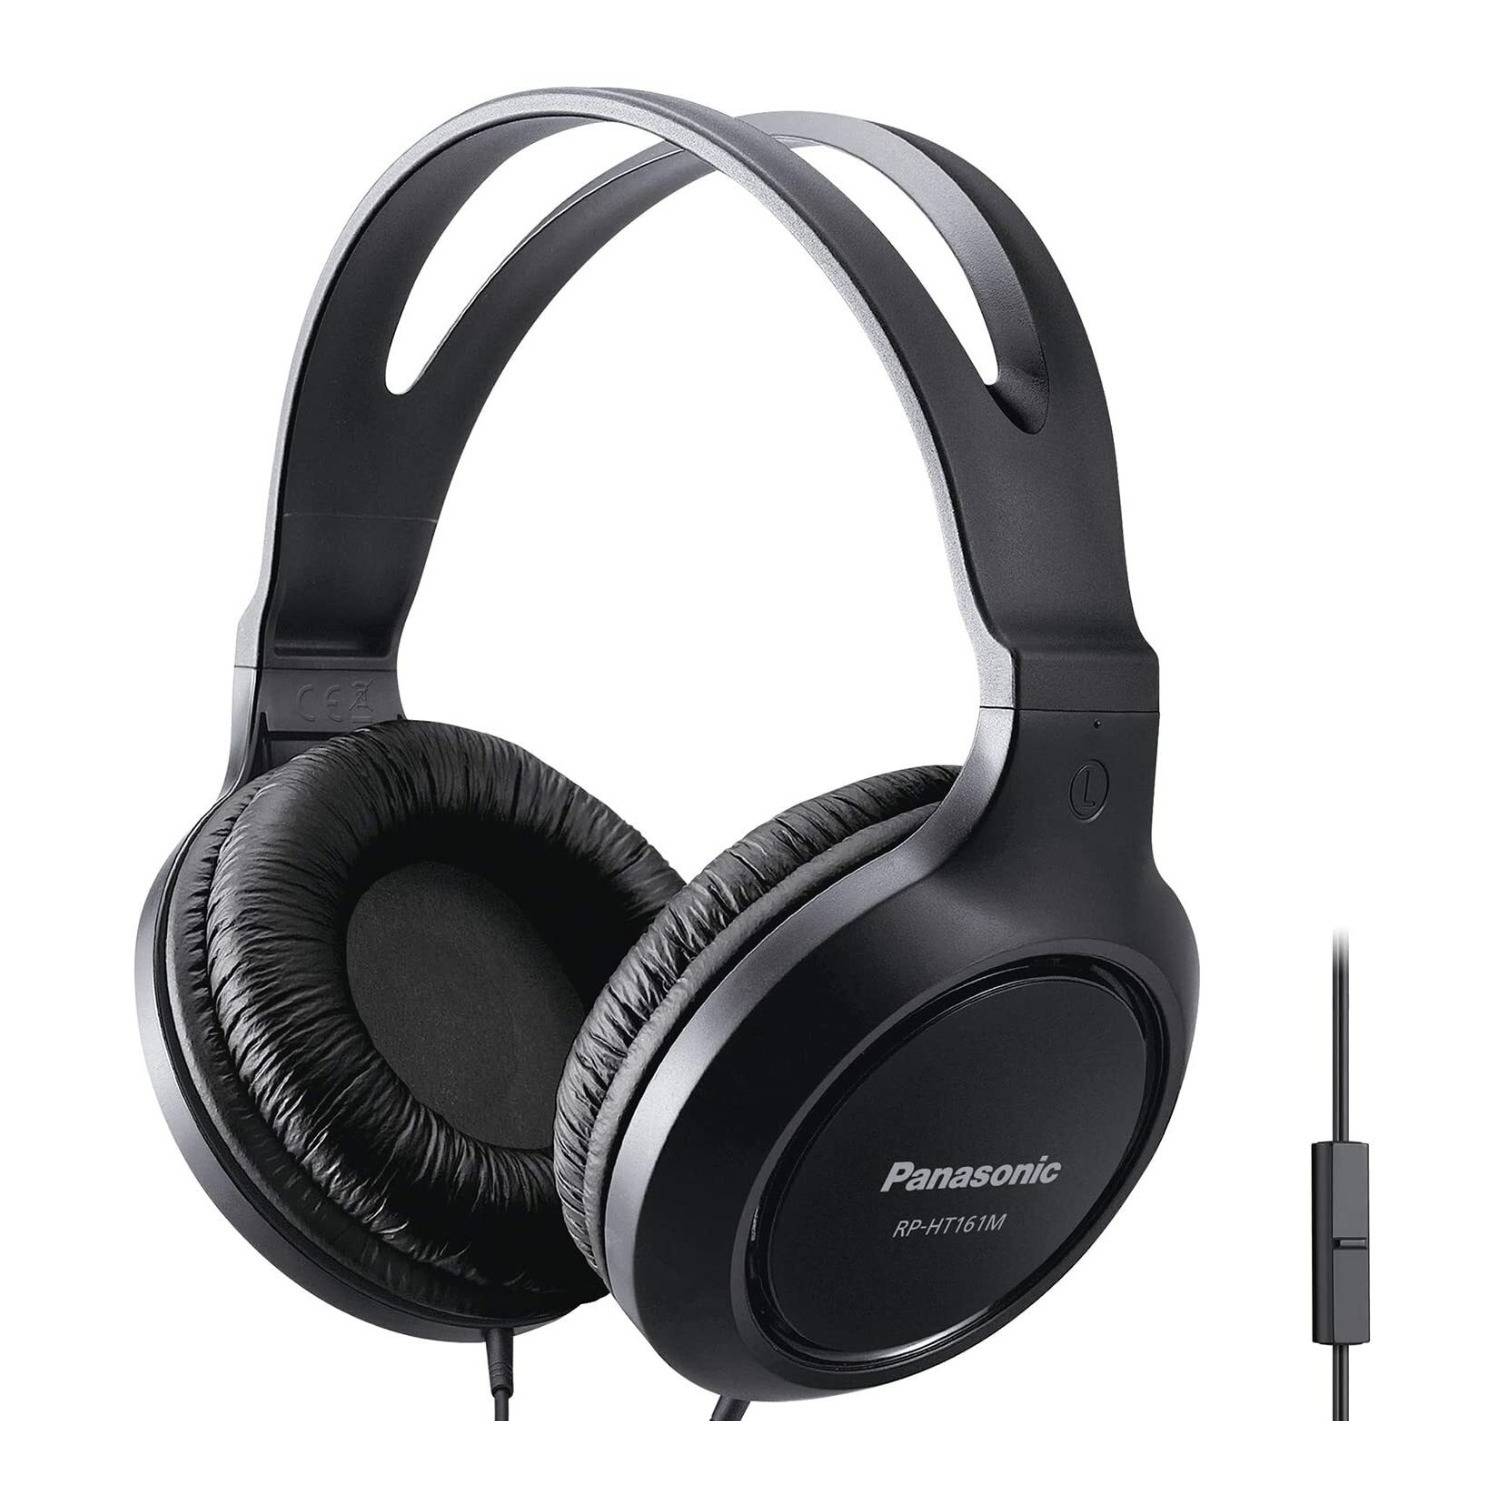 Panasonic RP-HT161M Full-Sized Lightweight Over-The-Ear Headphones with Mic and Long Cord (Black)